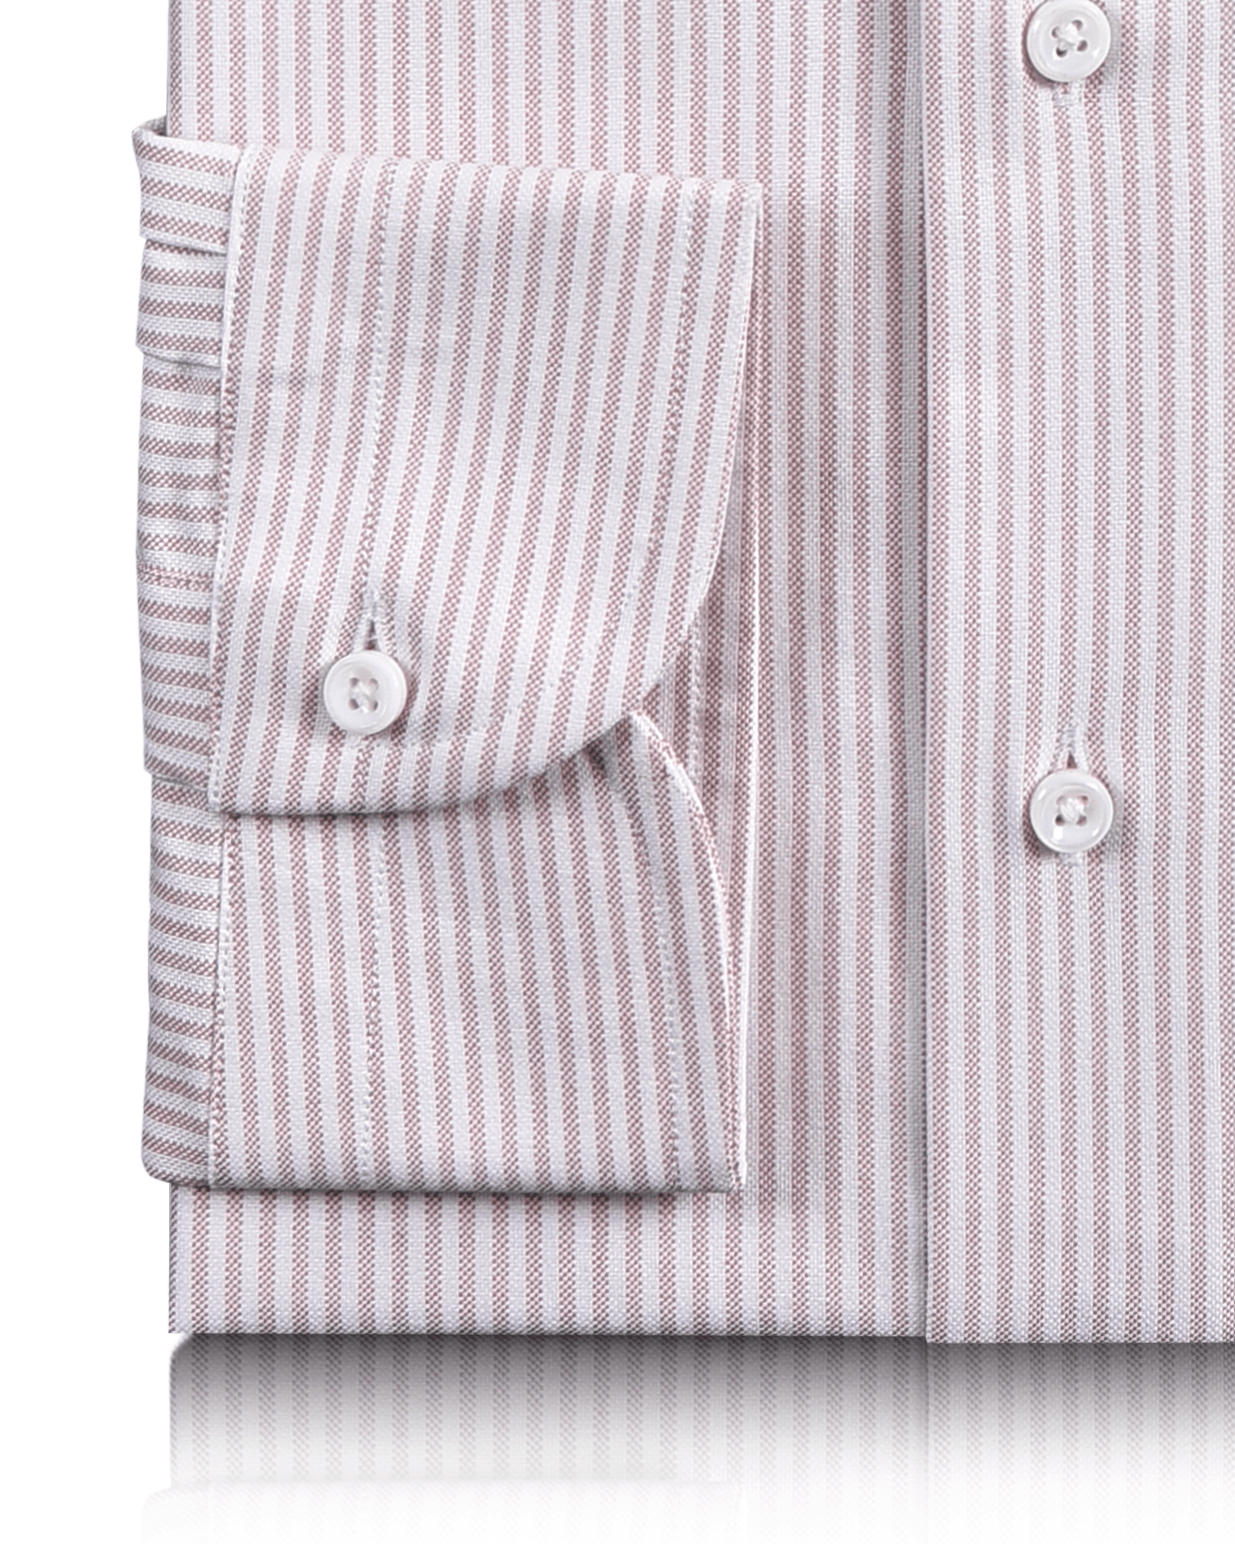 Cuff of the custom oxford shirt for men by Luxire in white with pink university stripes